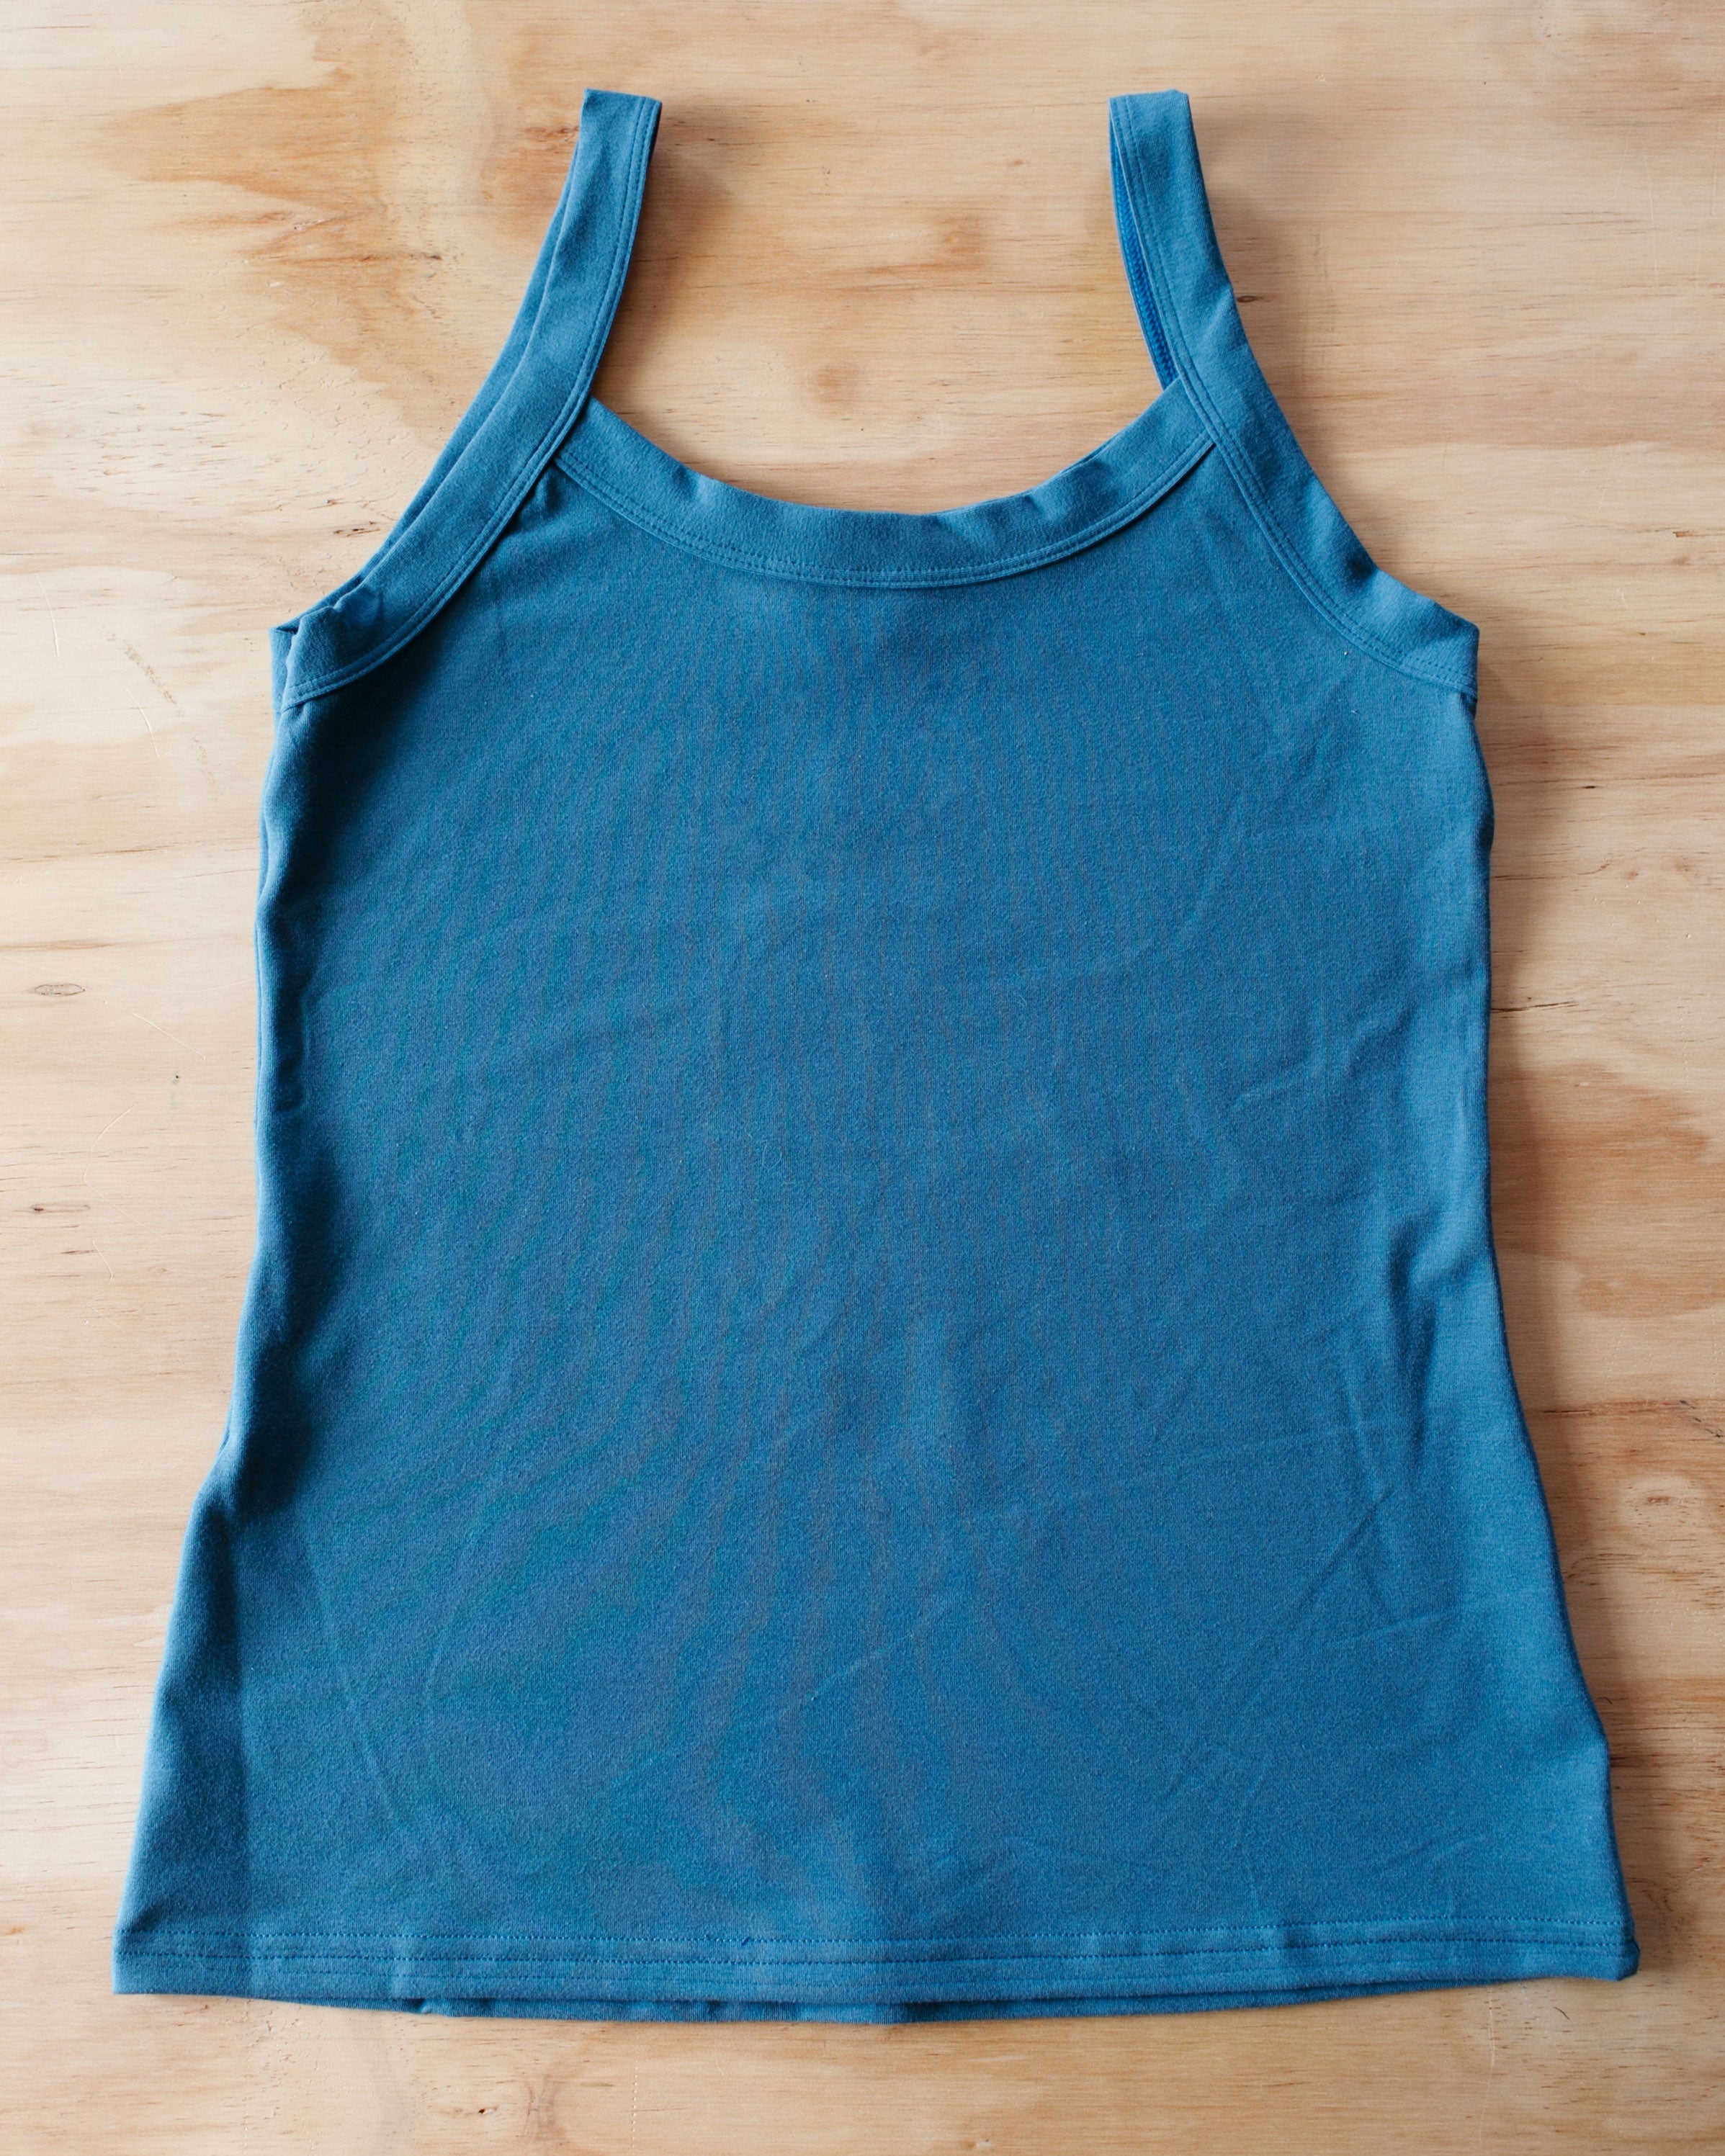 Flat lay of Thunderpants Organic Cotton Camisole in Stormy Blue color.